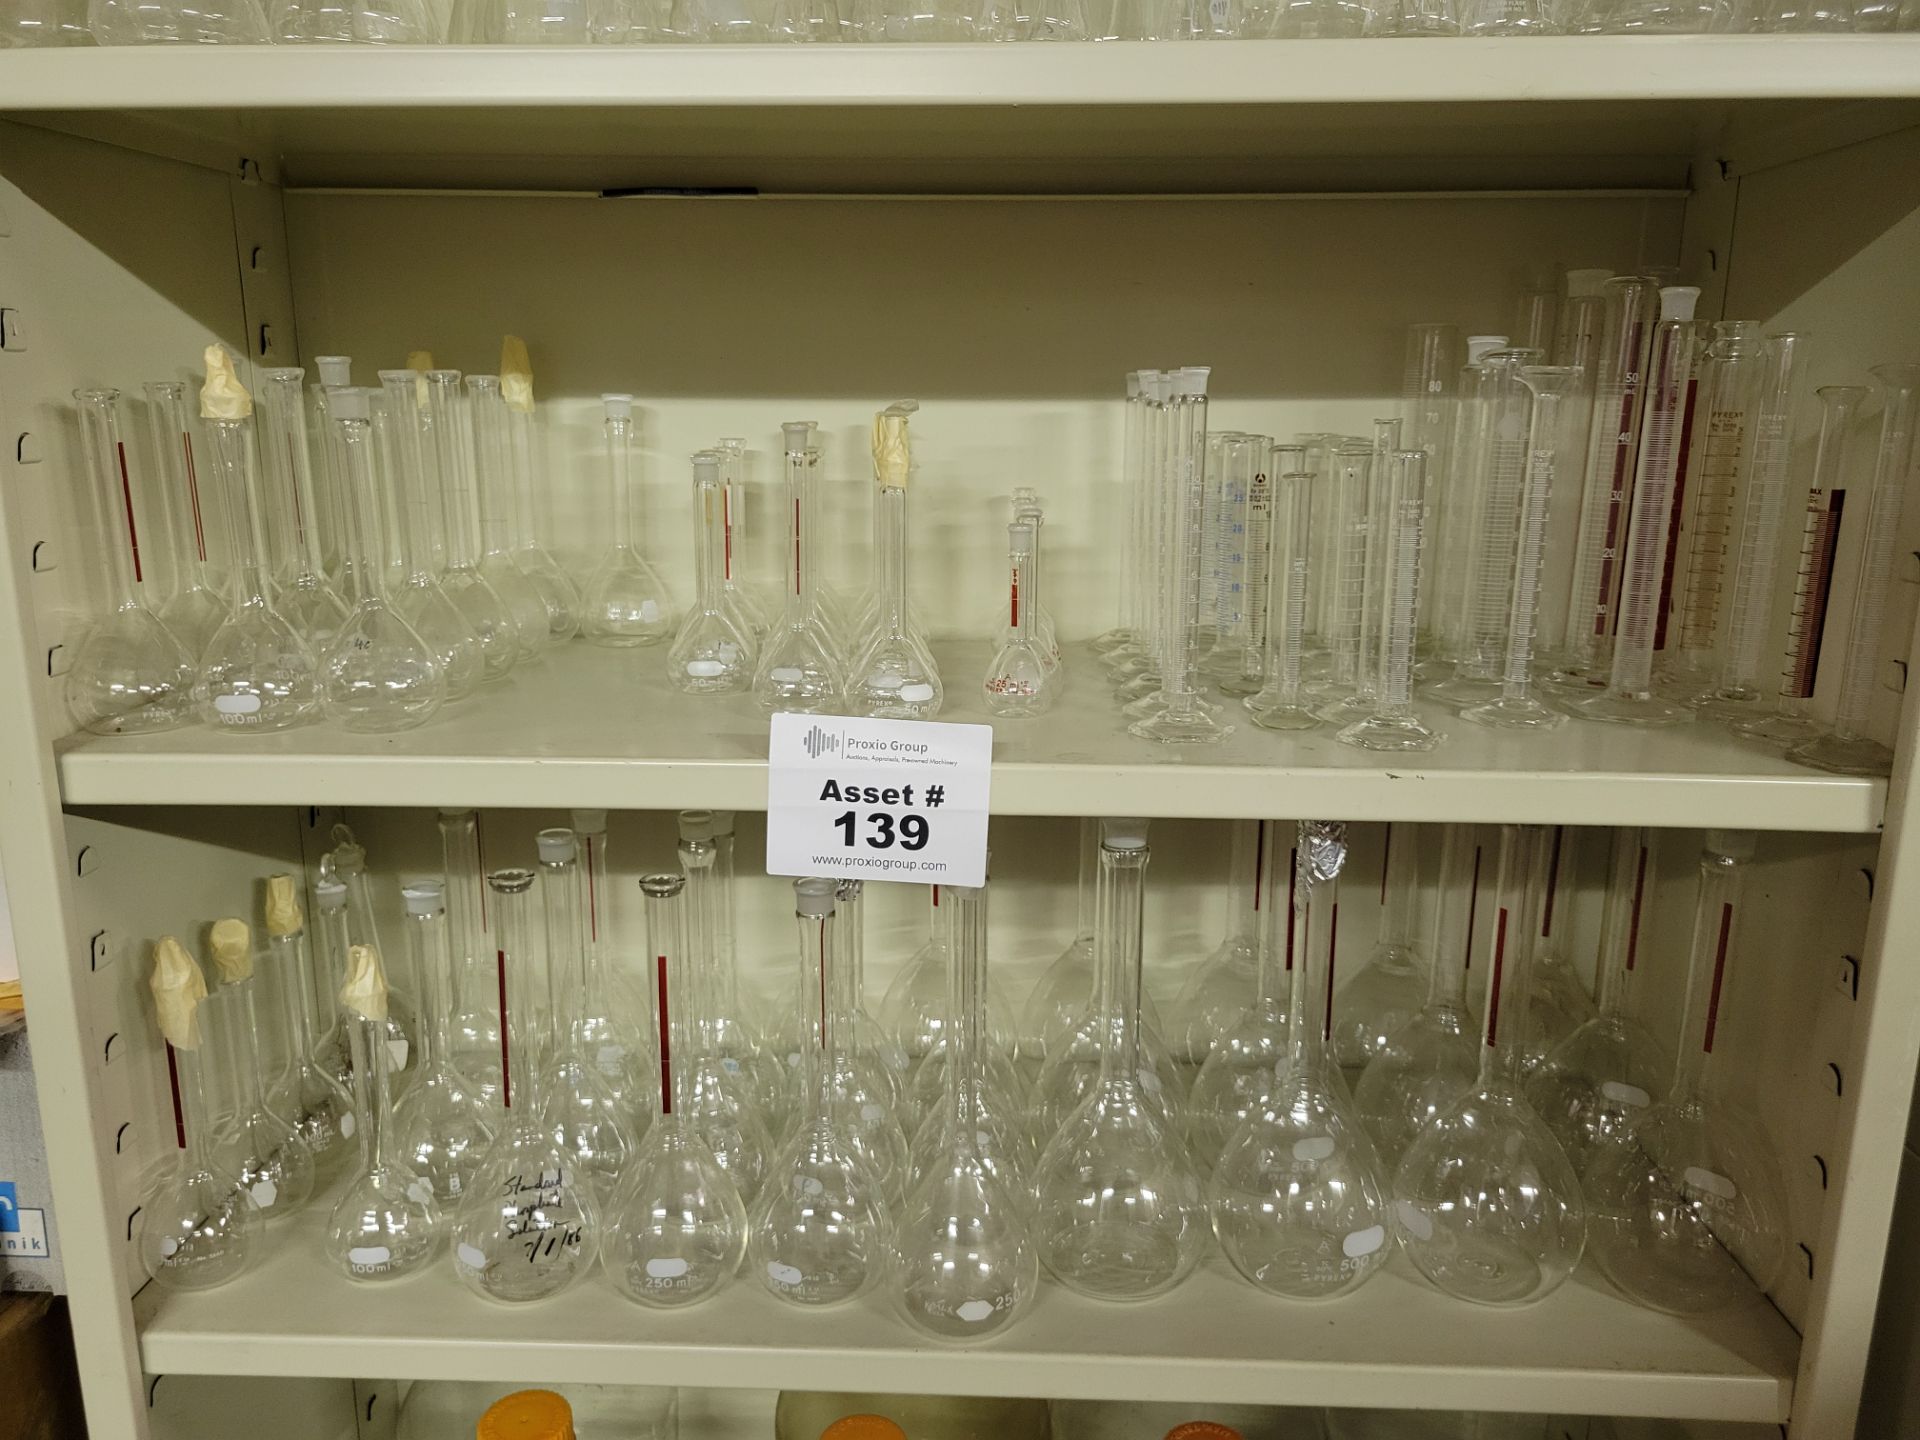 (2) Shelves of Various Sized and Manufacturer Glass Erlenmeyer Flasks Sizes Range From 25 to500mL